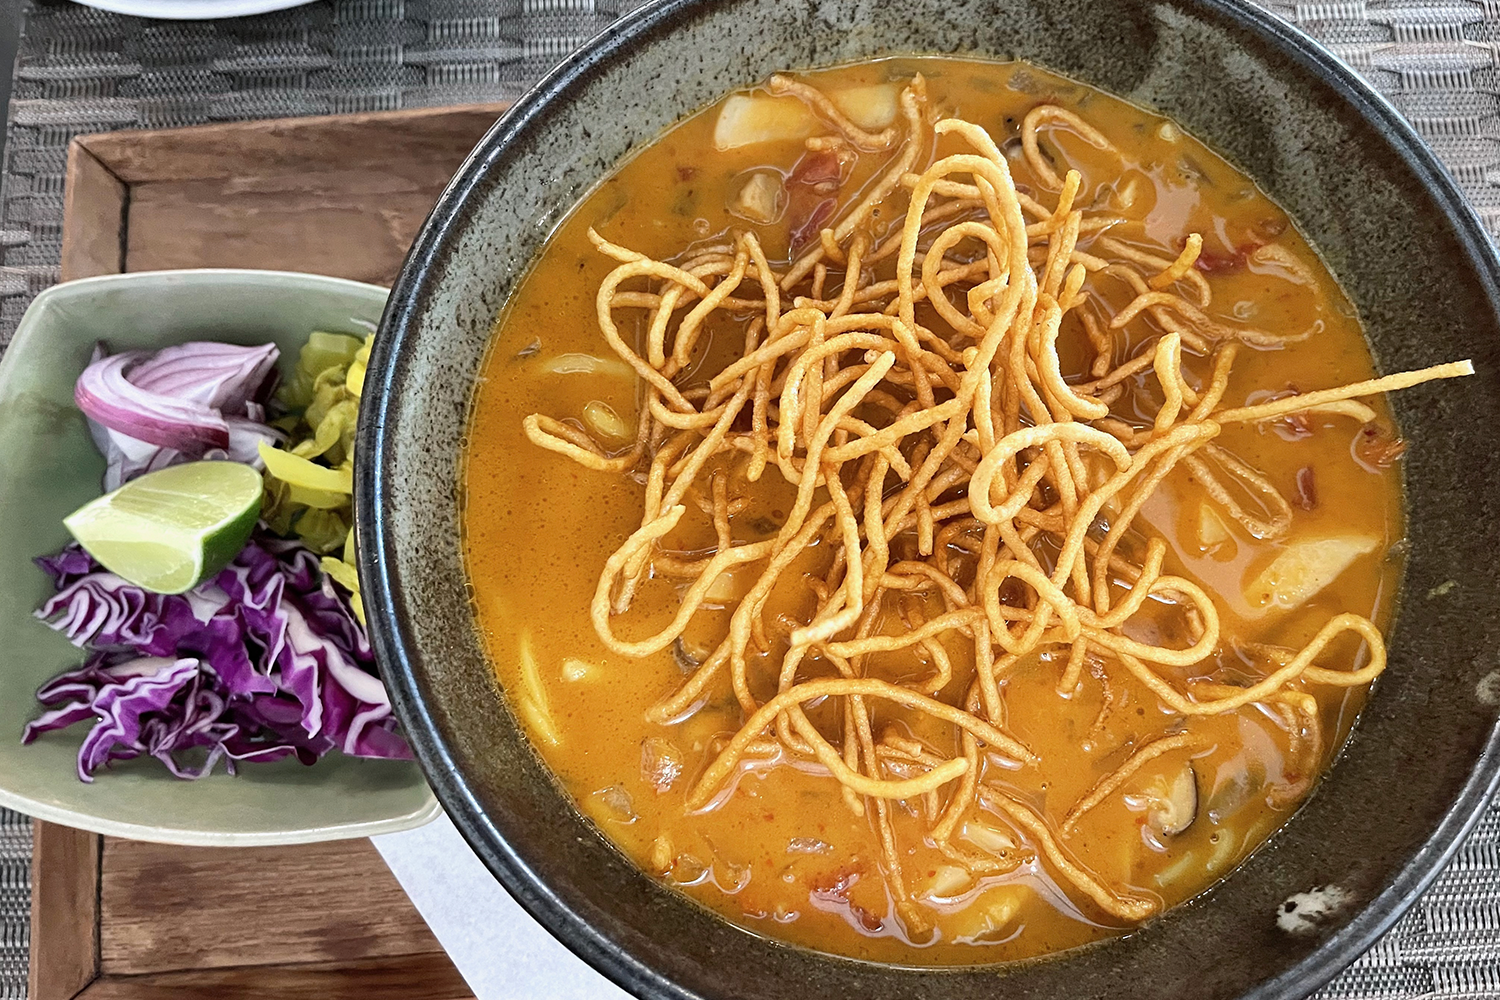 Khao soi is a popular soupy noodle dish from this region